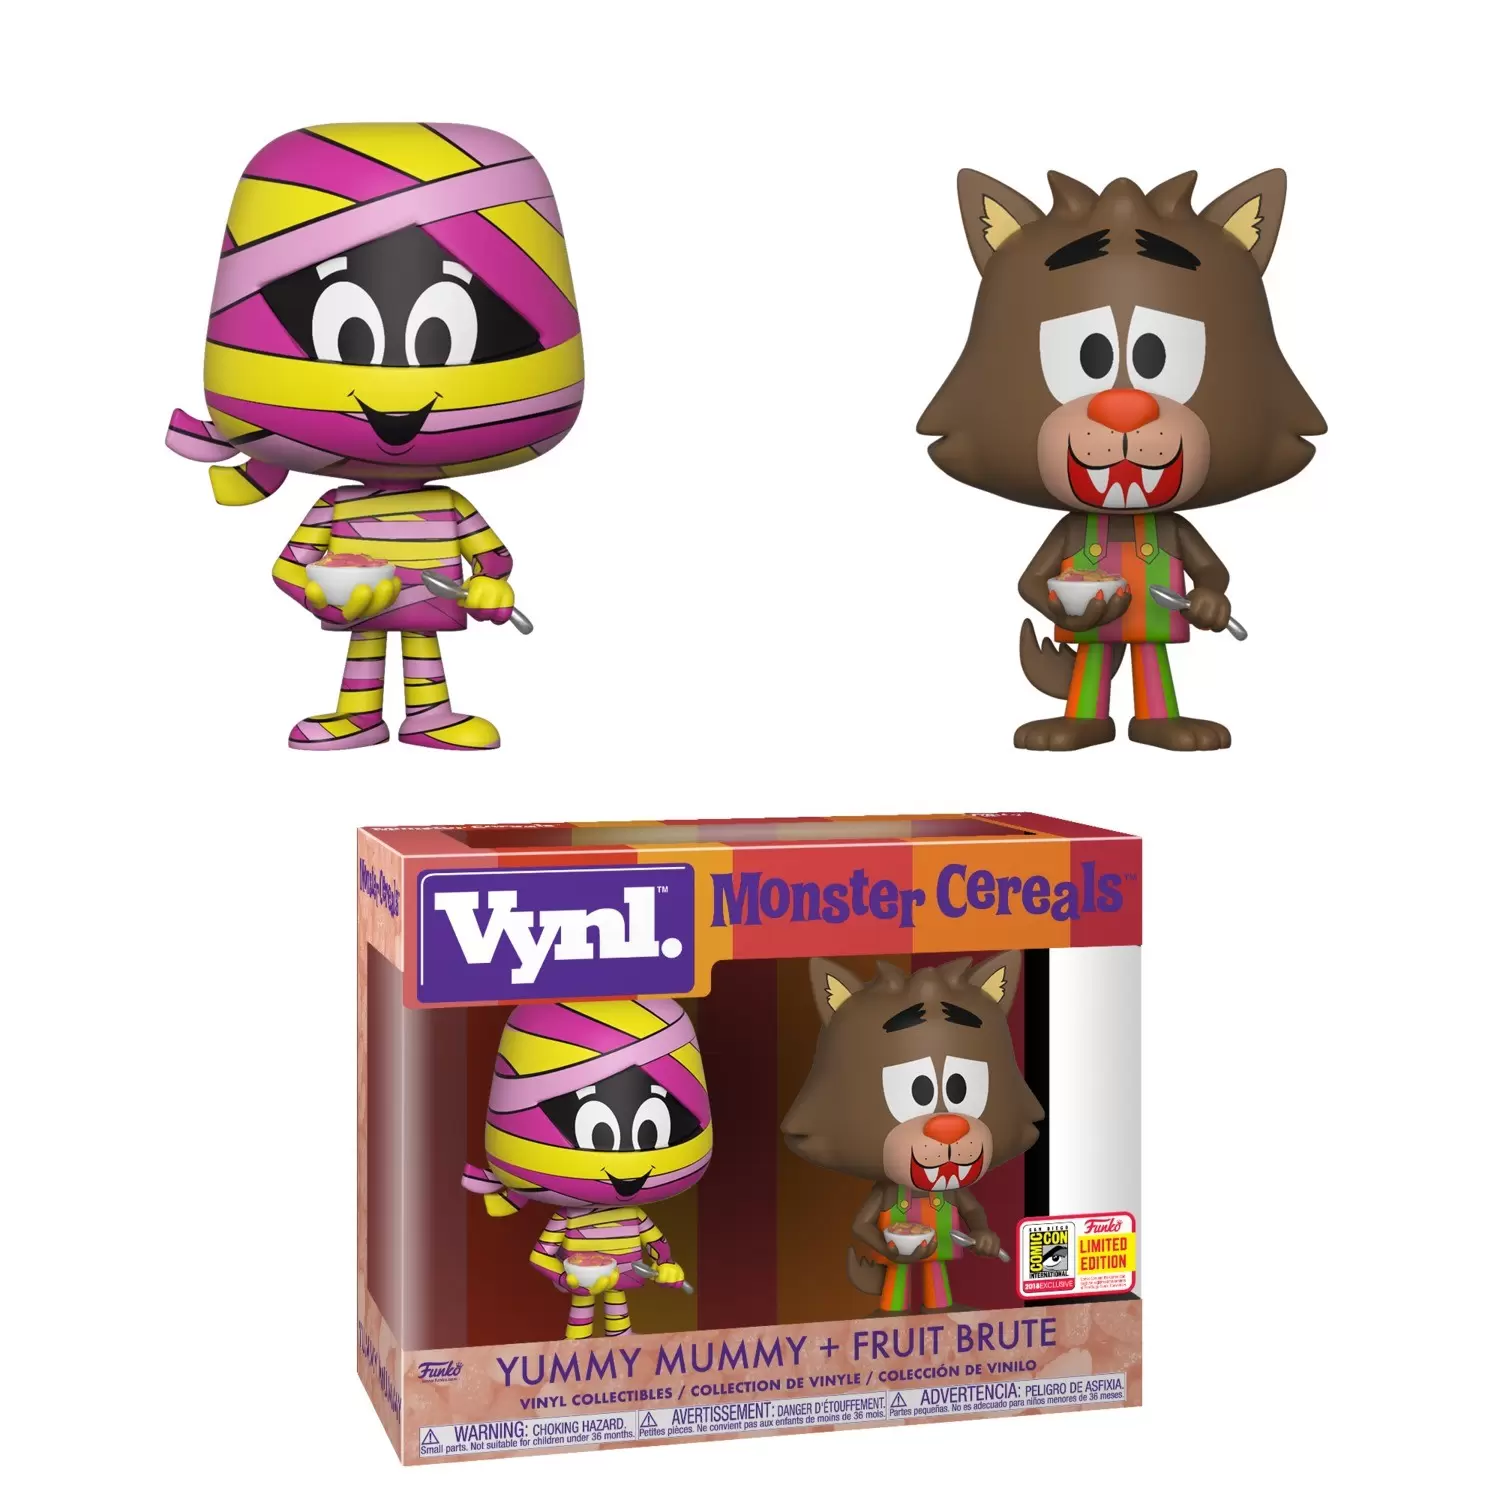 Funko Vynl. - Monster Cereals - Yummy Mummy + Fruit Brute